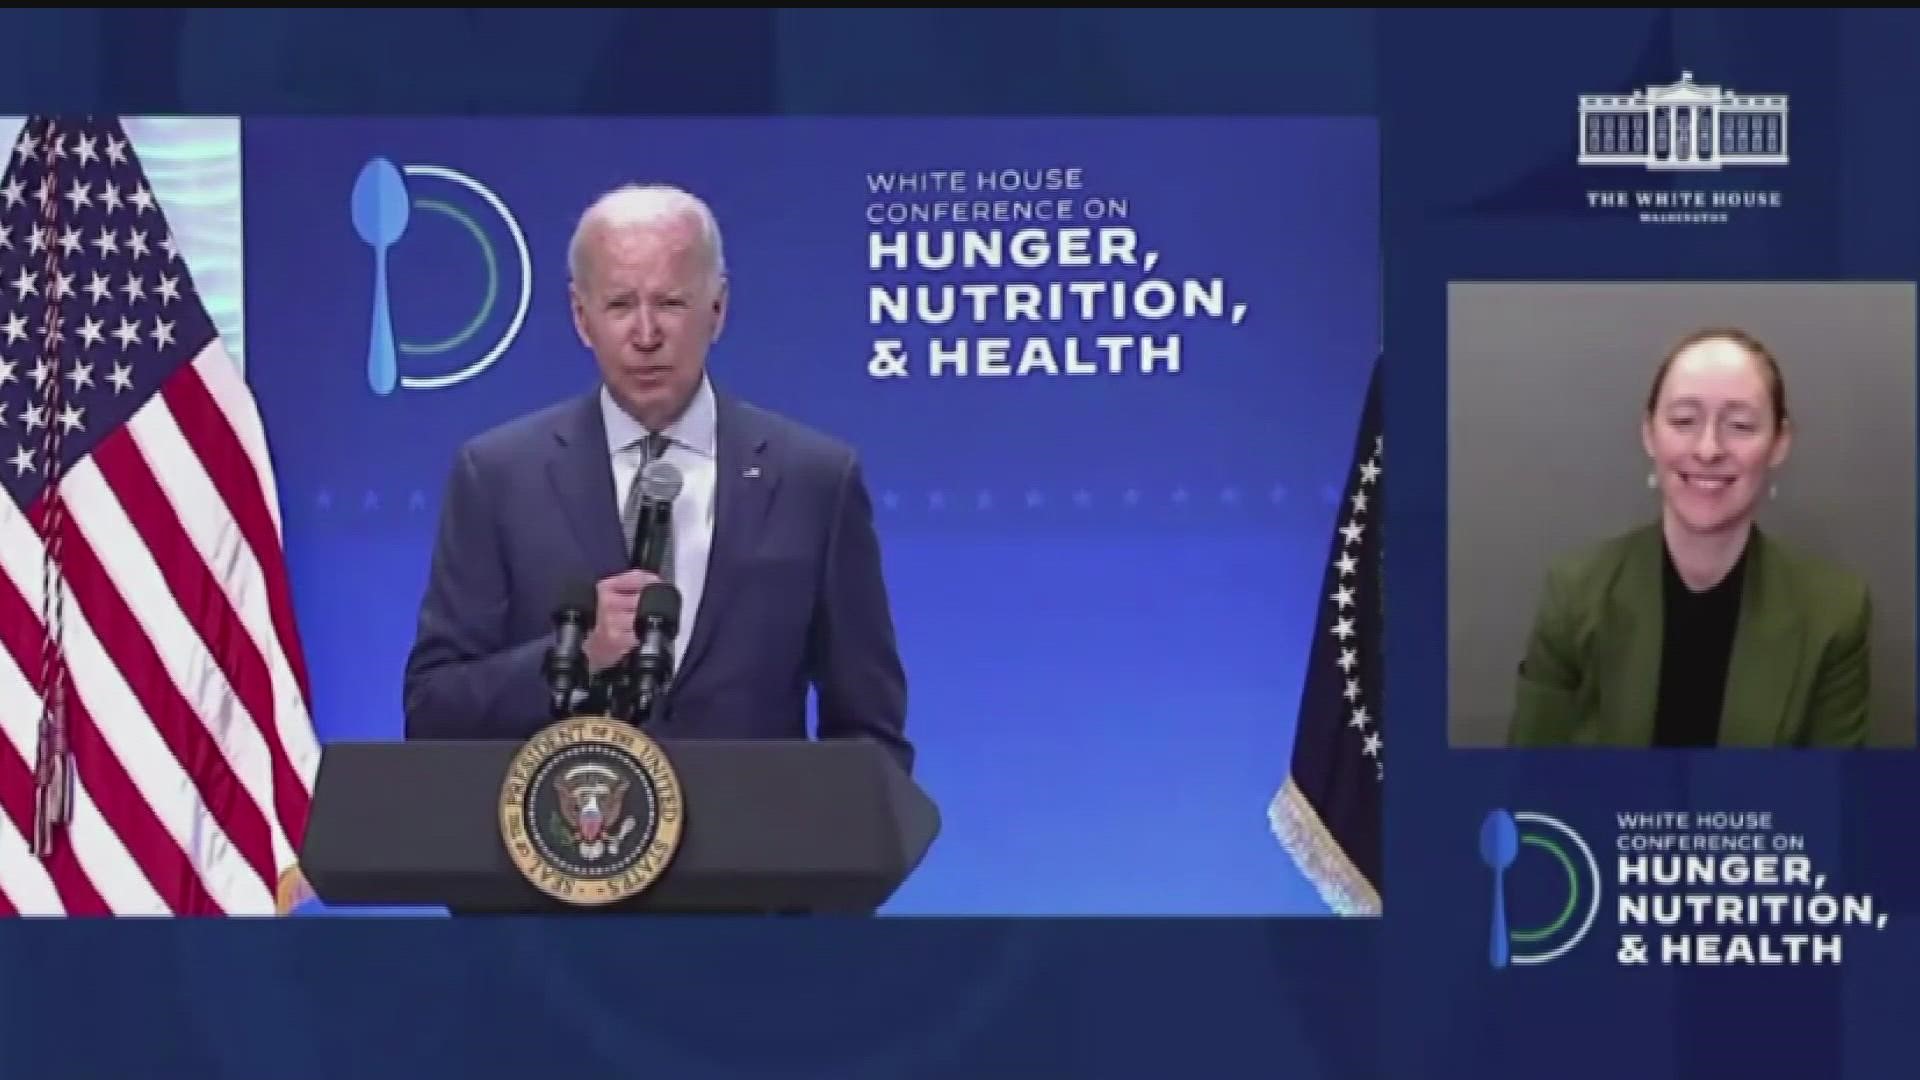 On Wednesday, President Biden announced a plan to end hunger in the U.S. by 2030.